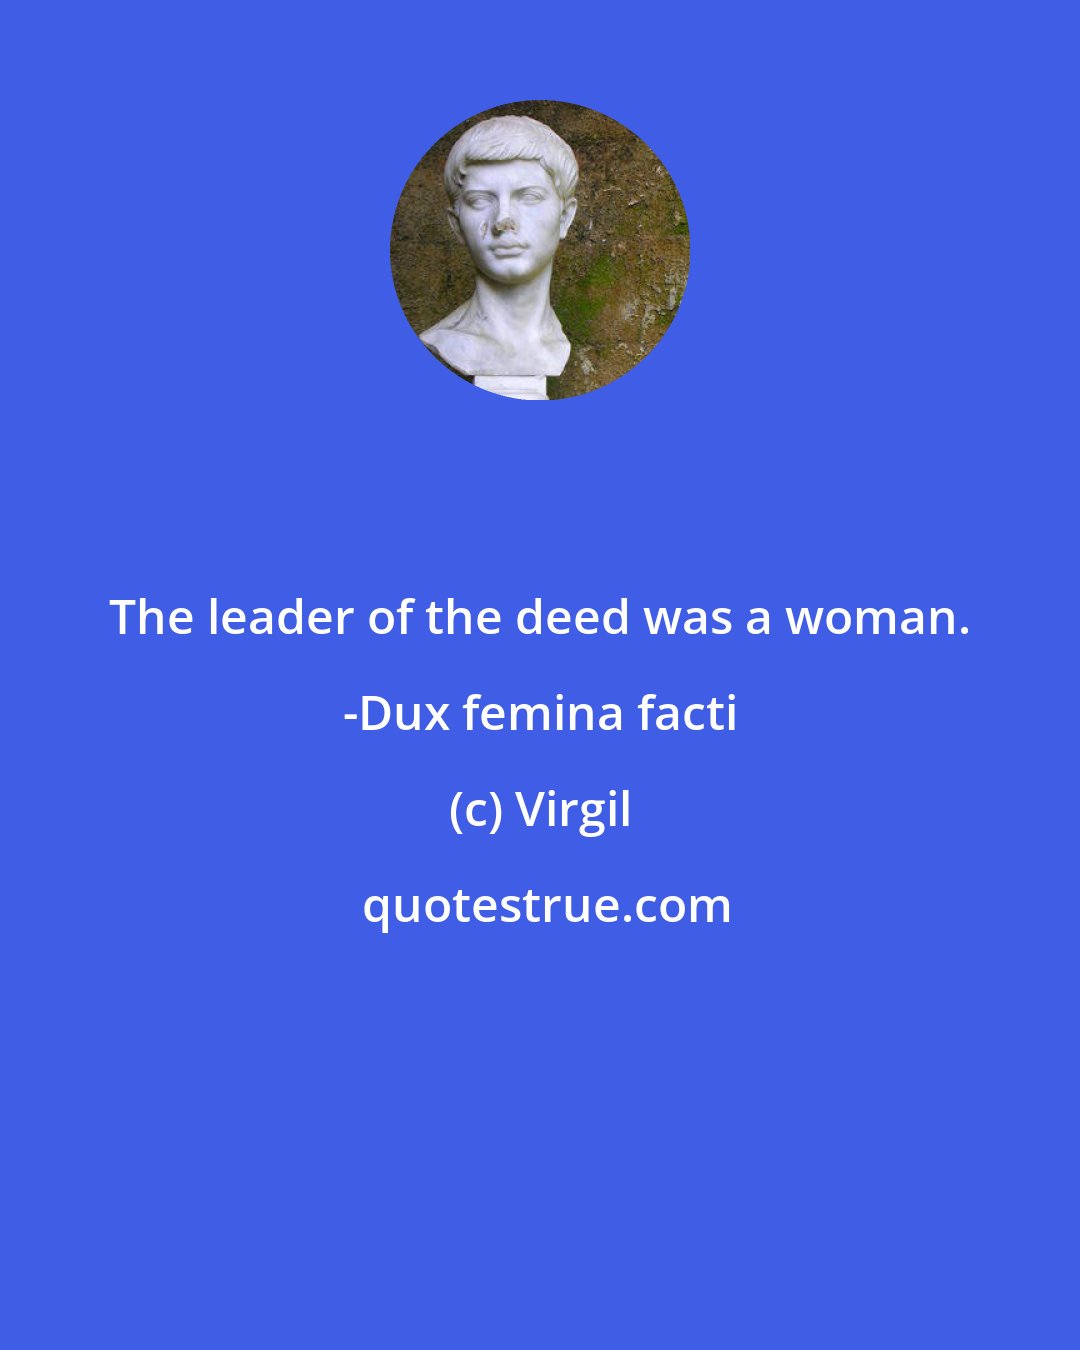 Virgil: The leader of the deed was a woman. -Dux femina facti